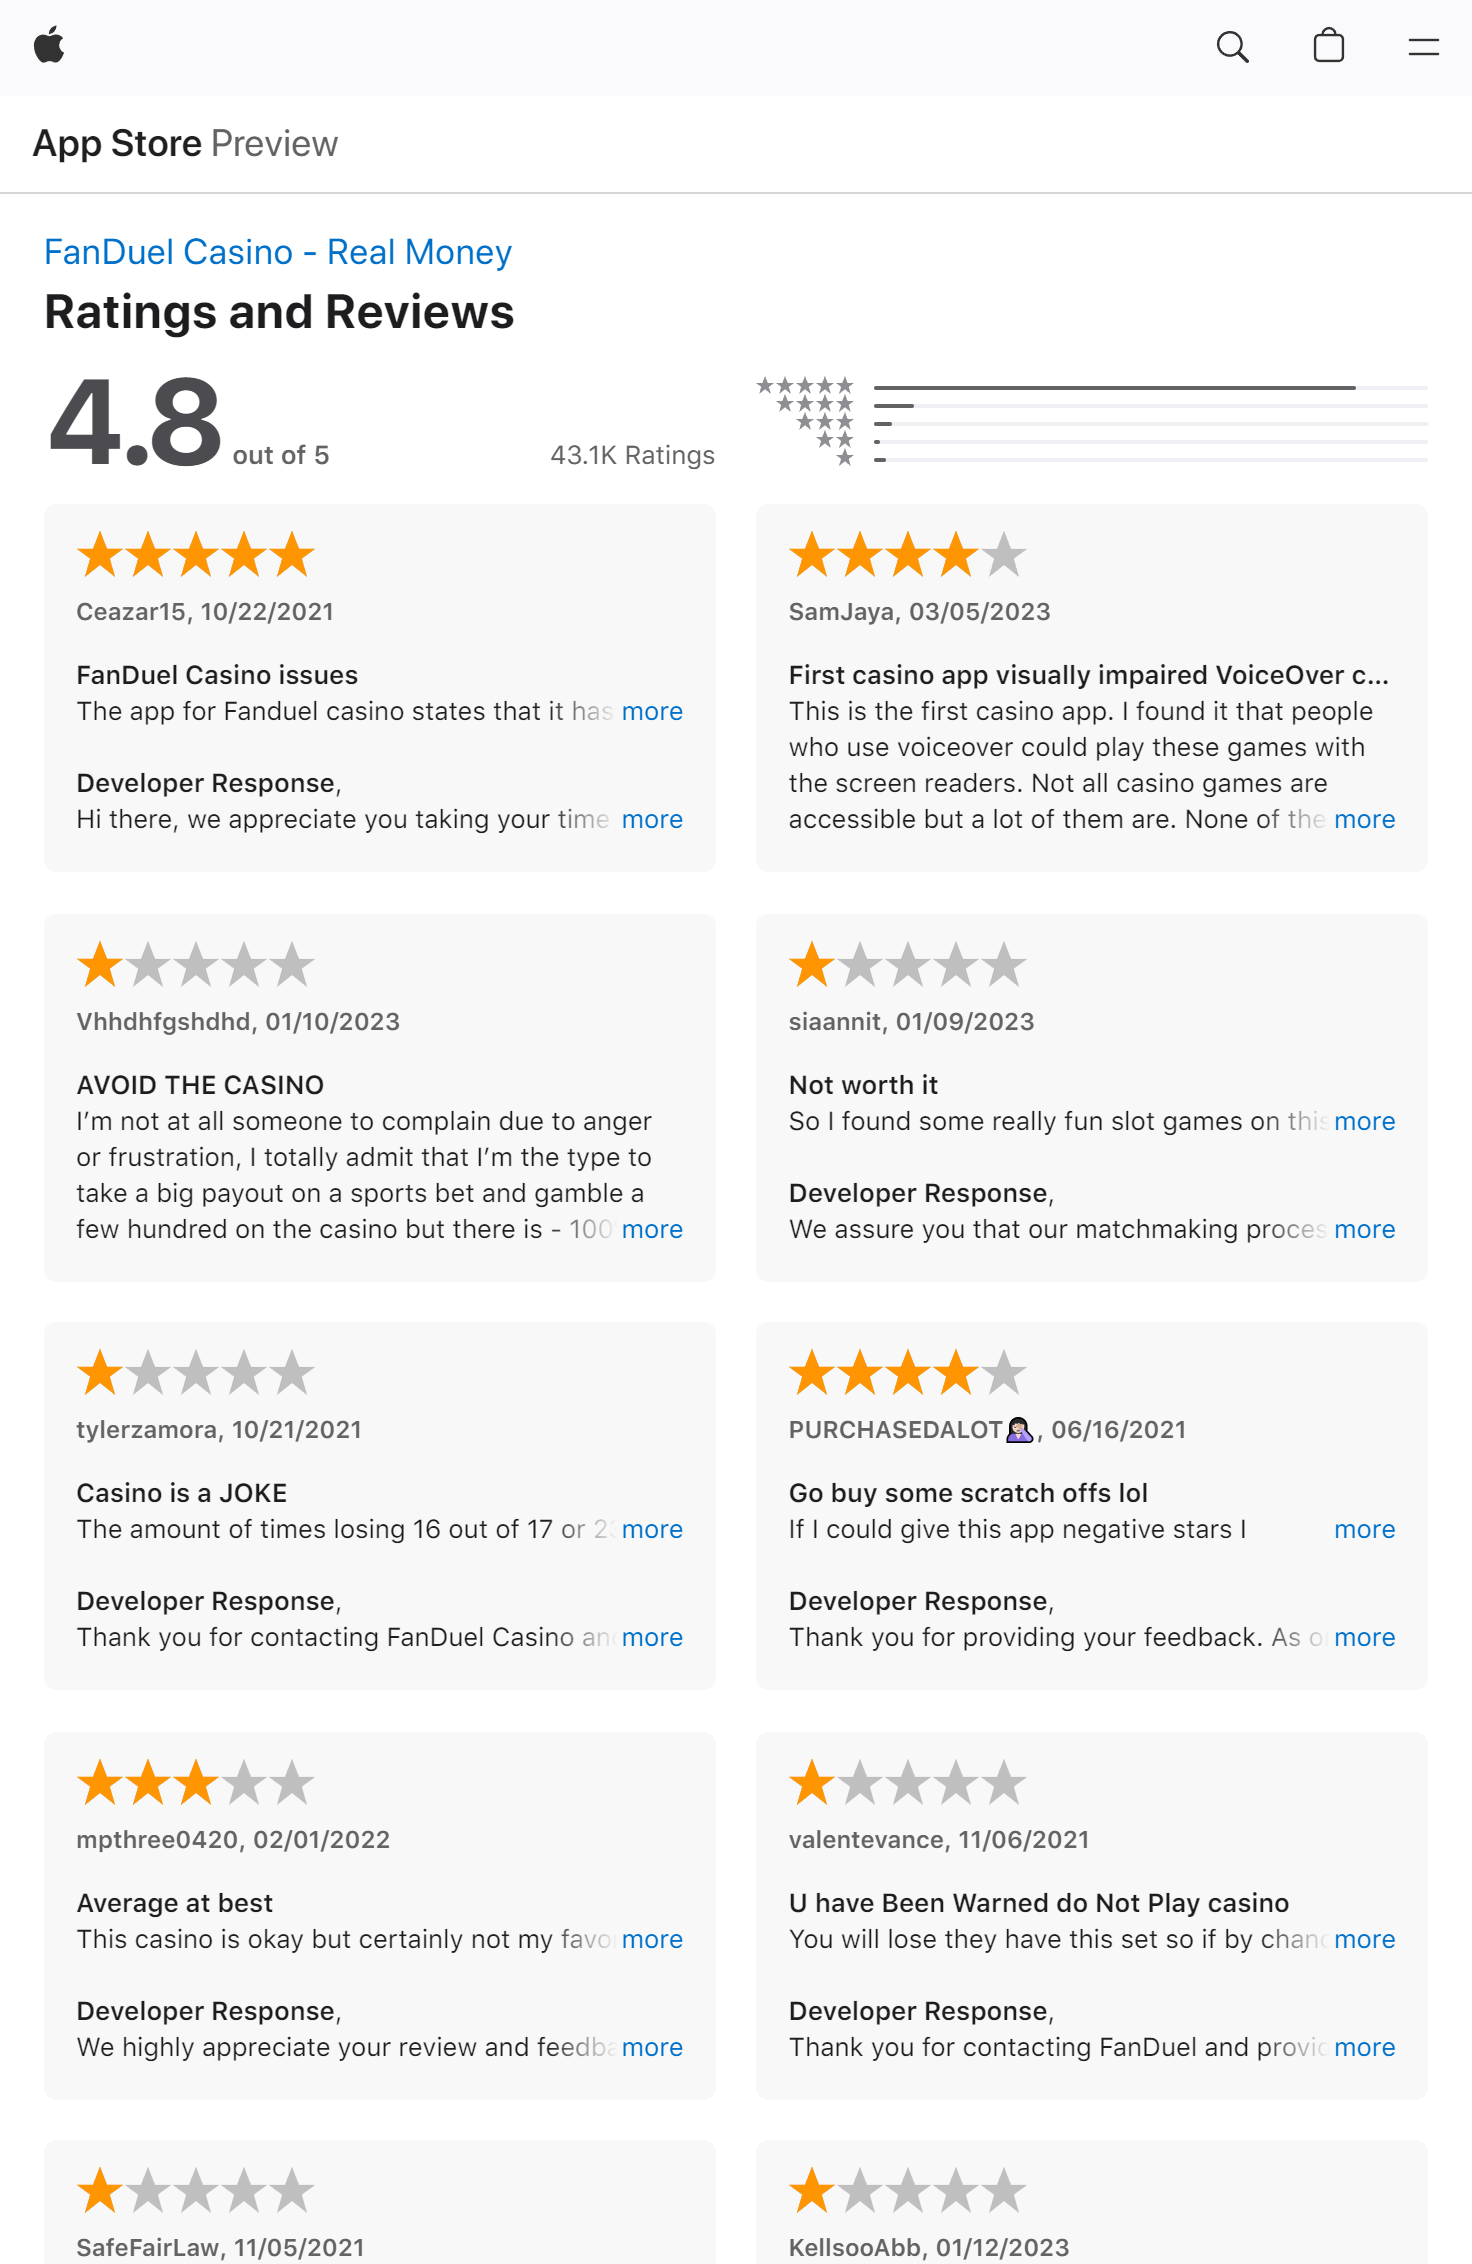 Apple App store ratings and reviews for the FanDuel NJ